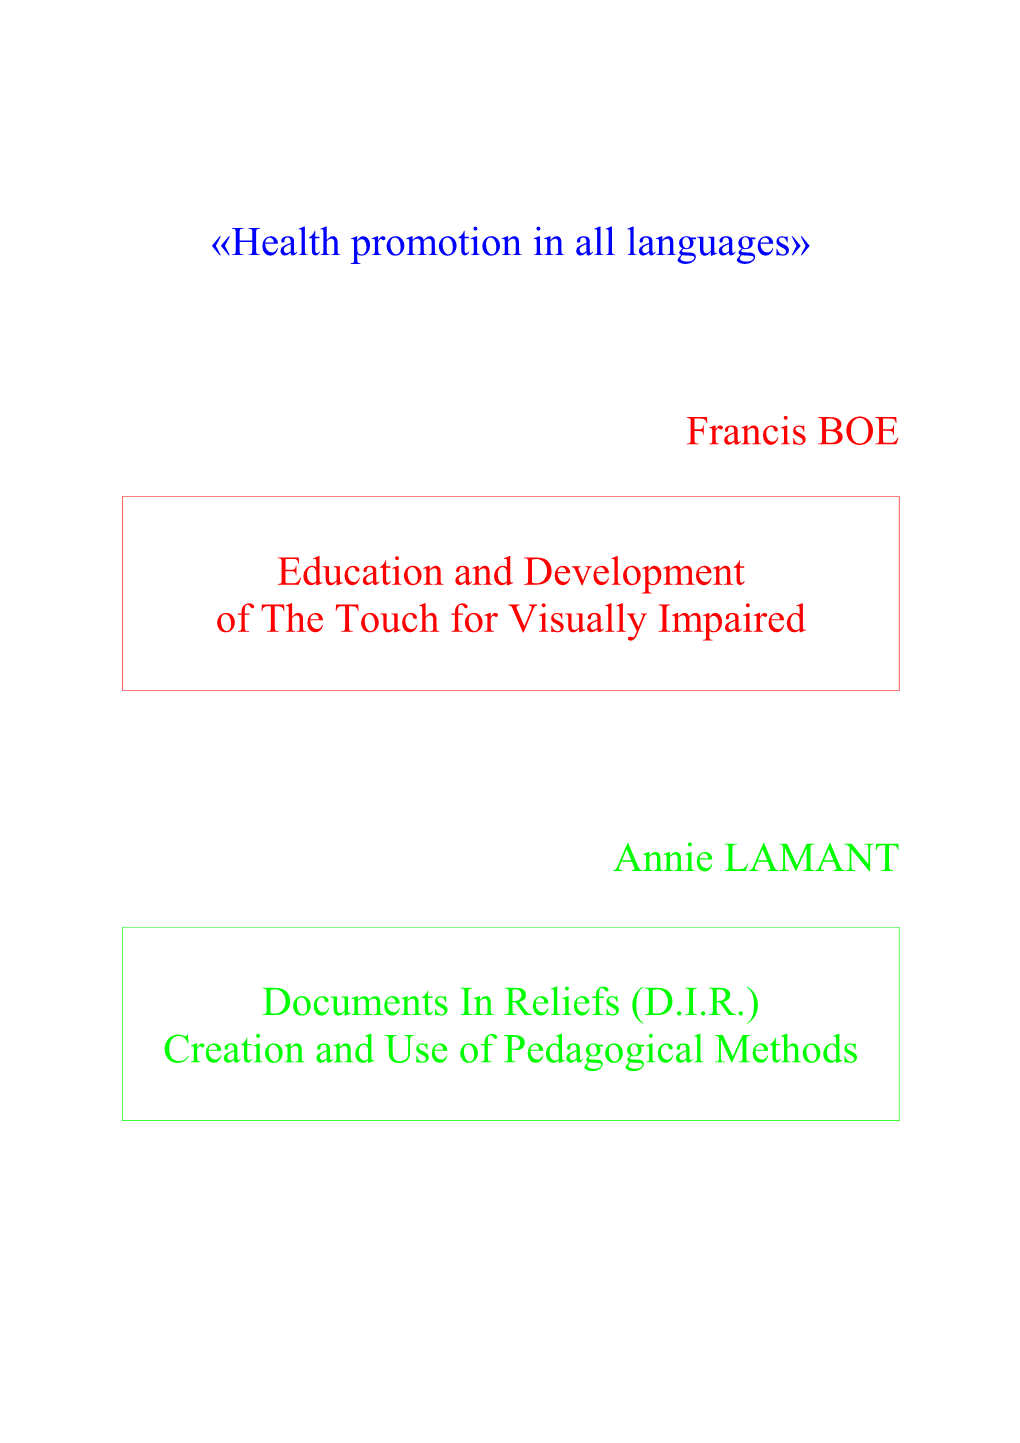 Health Promotion in All Languages